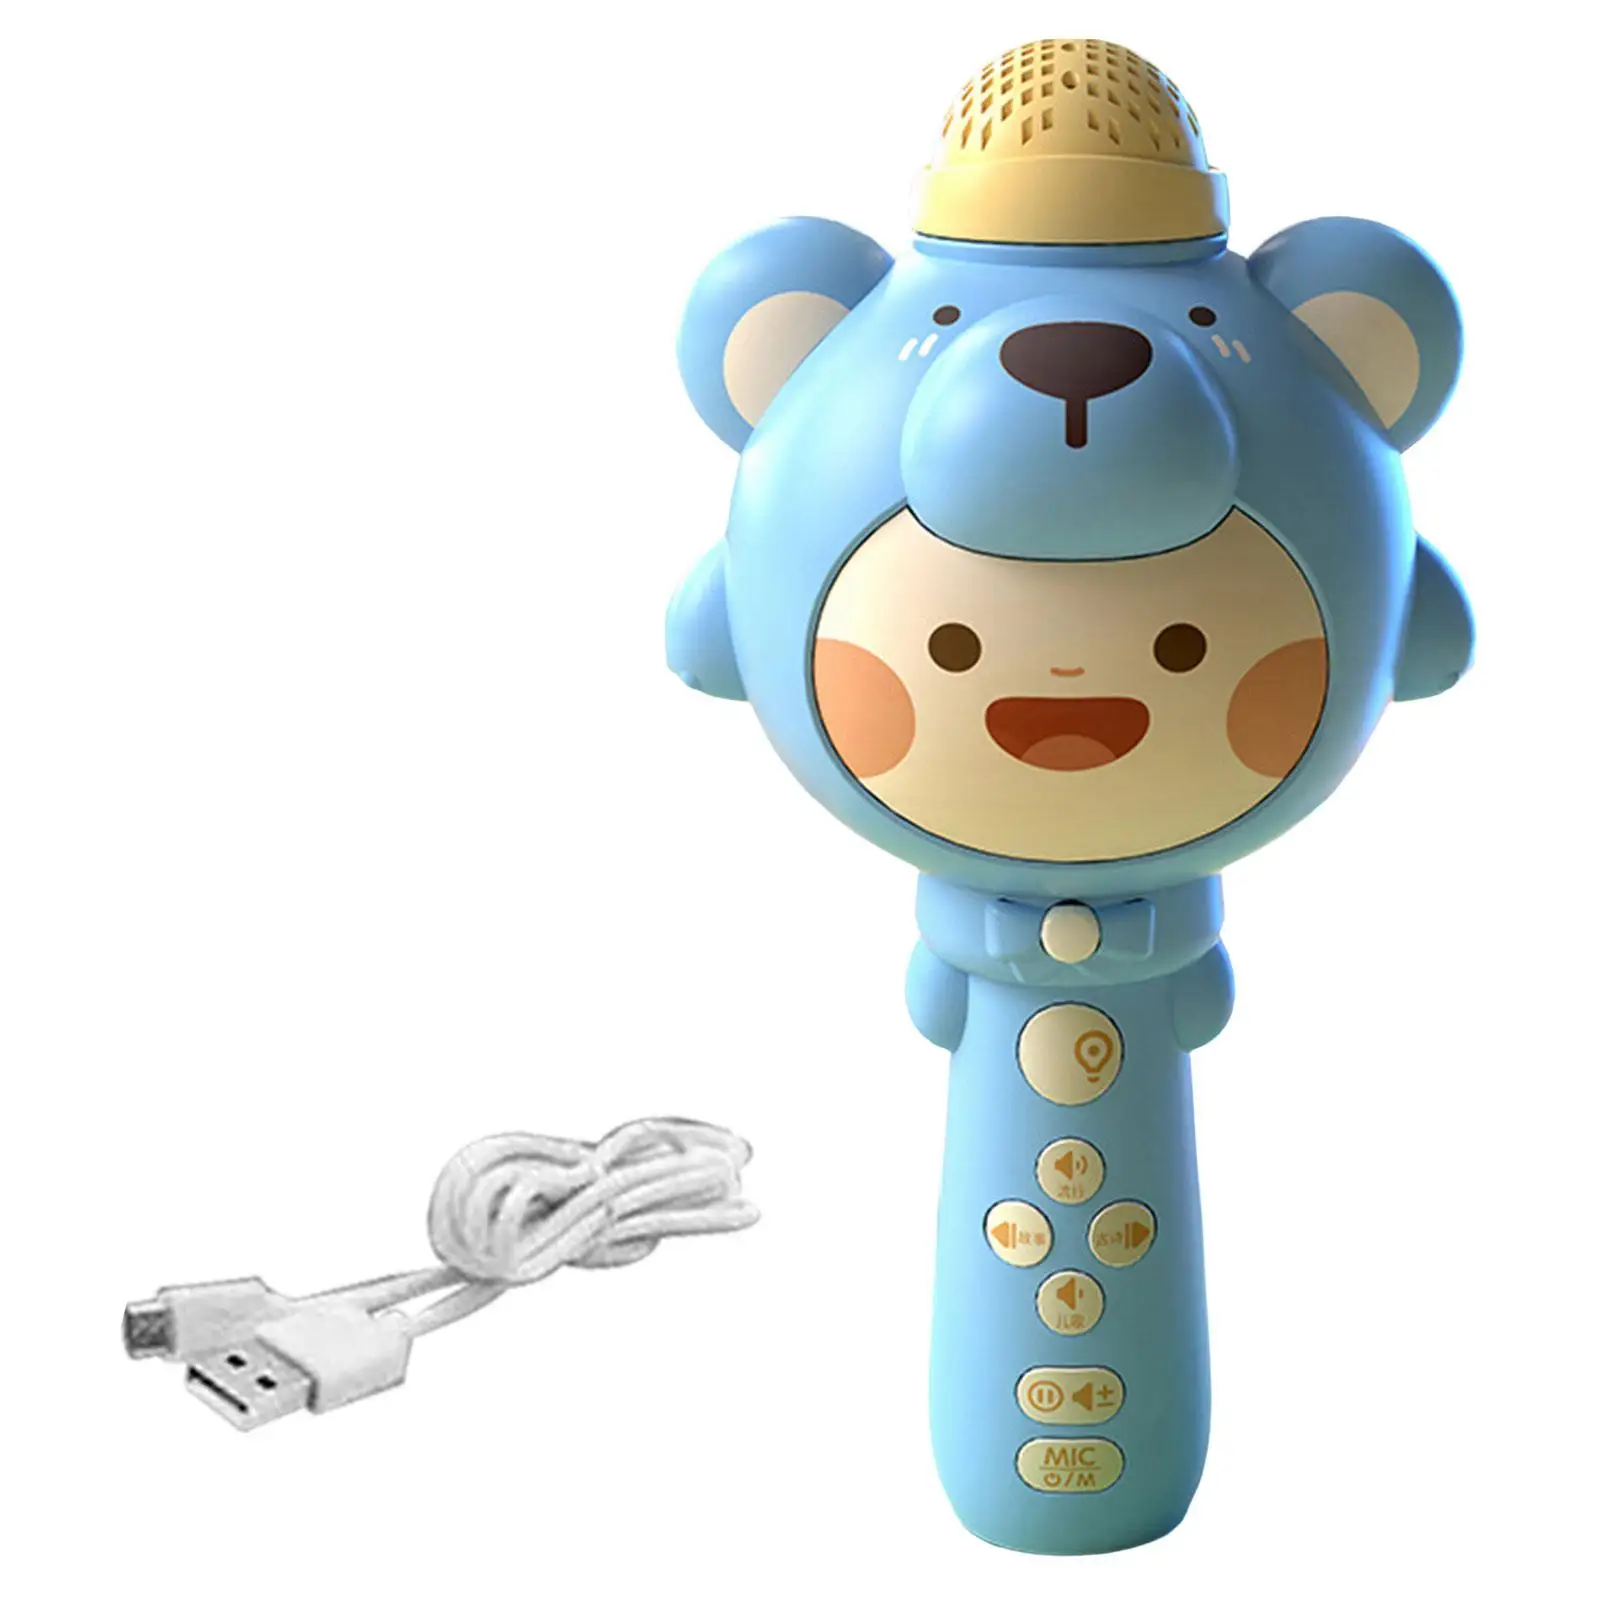 Kidsrophone Machine Toy Bluetooth Microphone for Adults Children